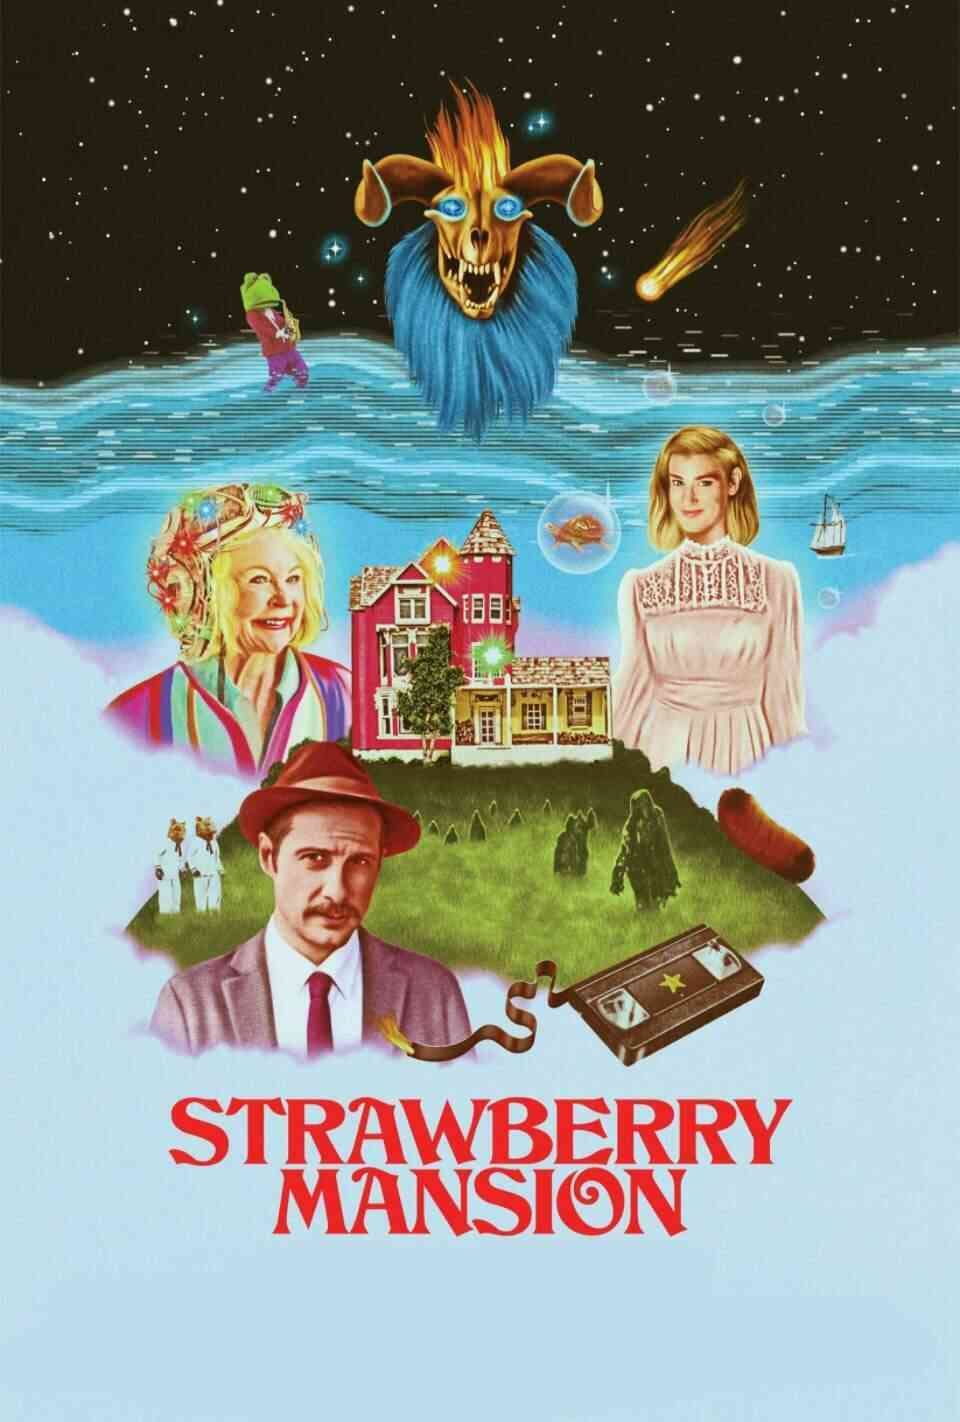 Read Strawberry Mansion screenplay (poster)